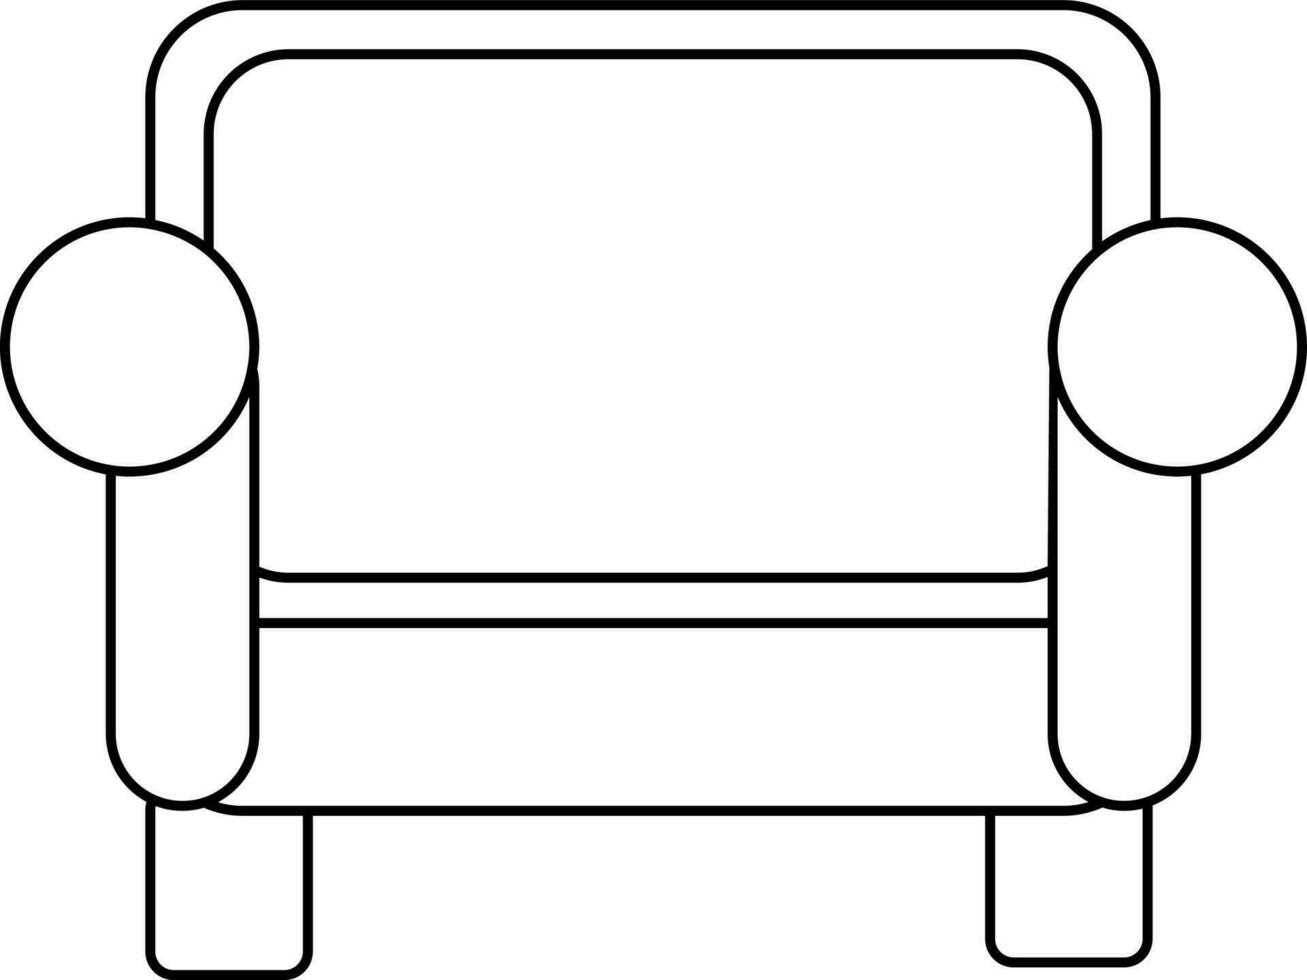 Stroke style of armchair icon made for household. vector